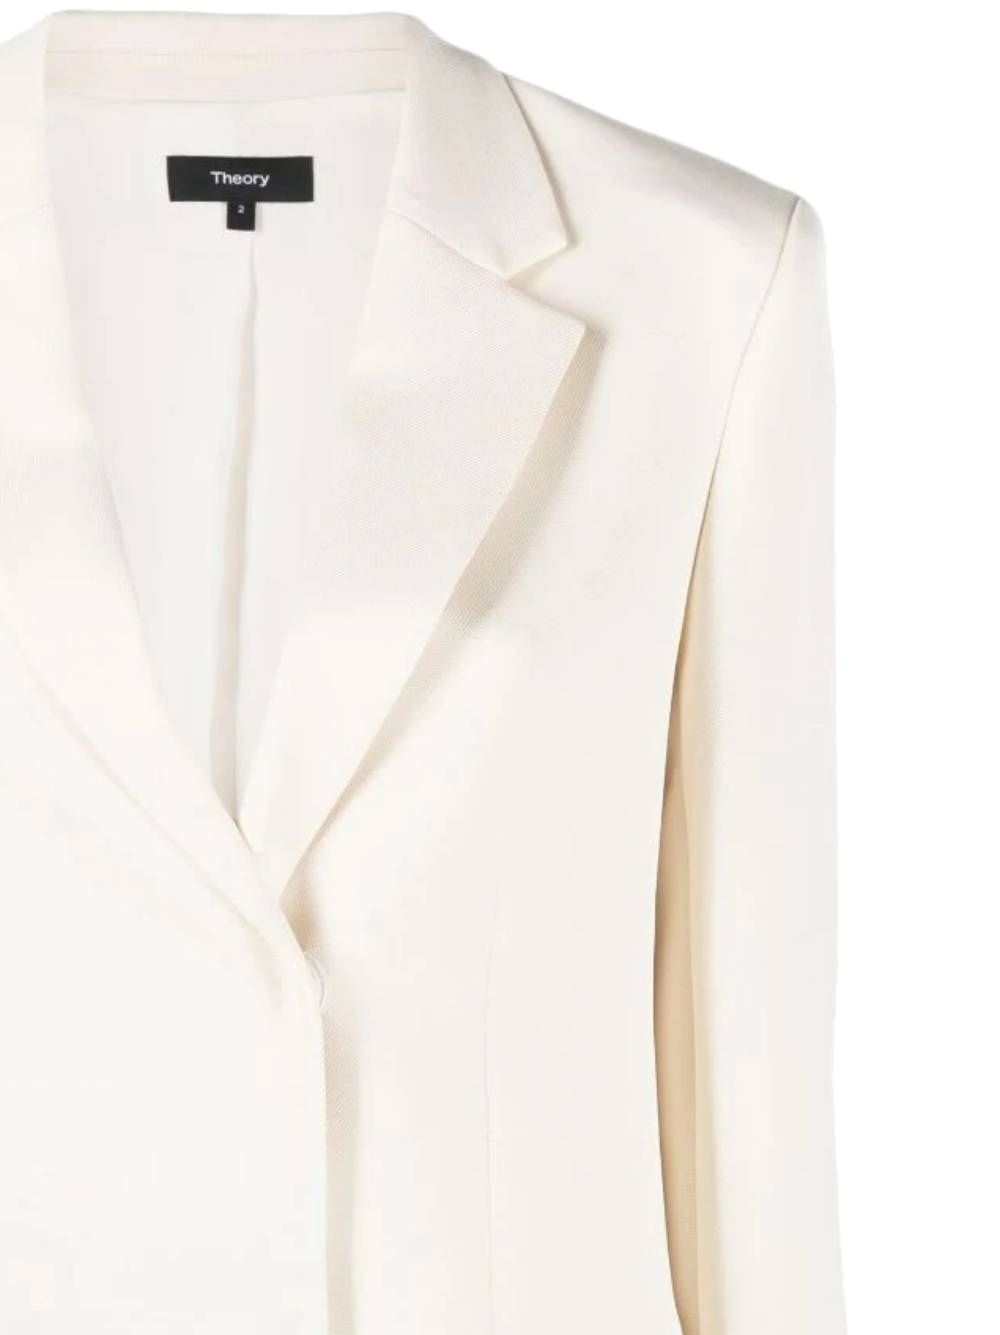 Single-breasted blazer with classic lapel